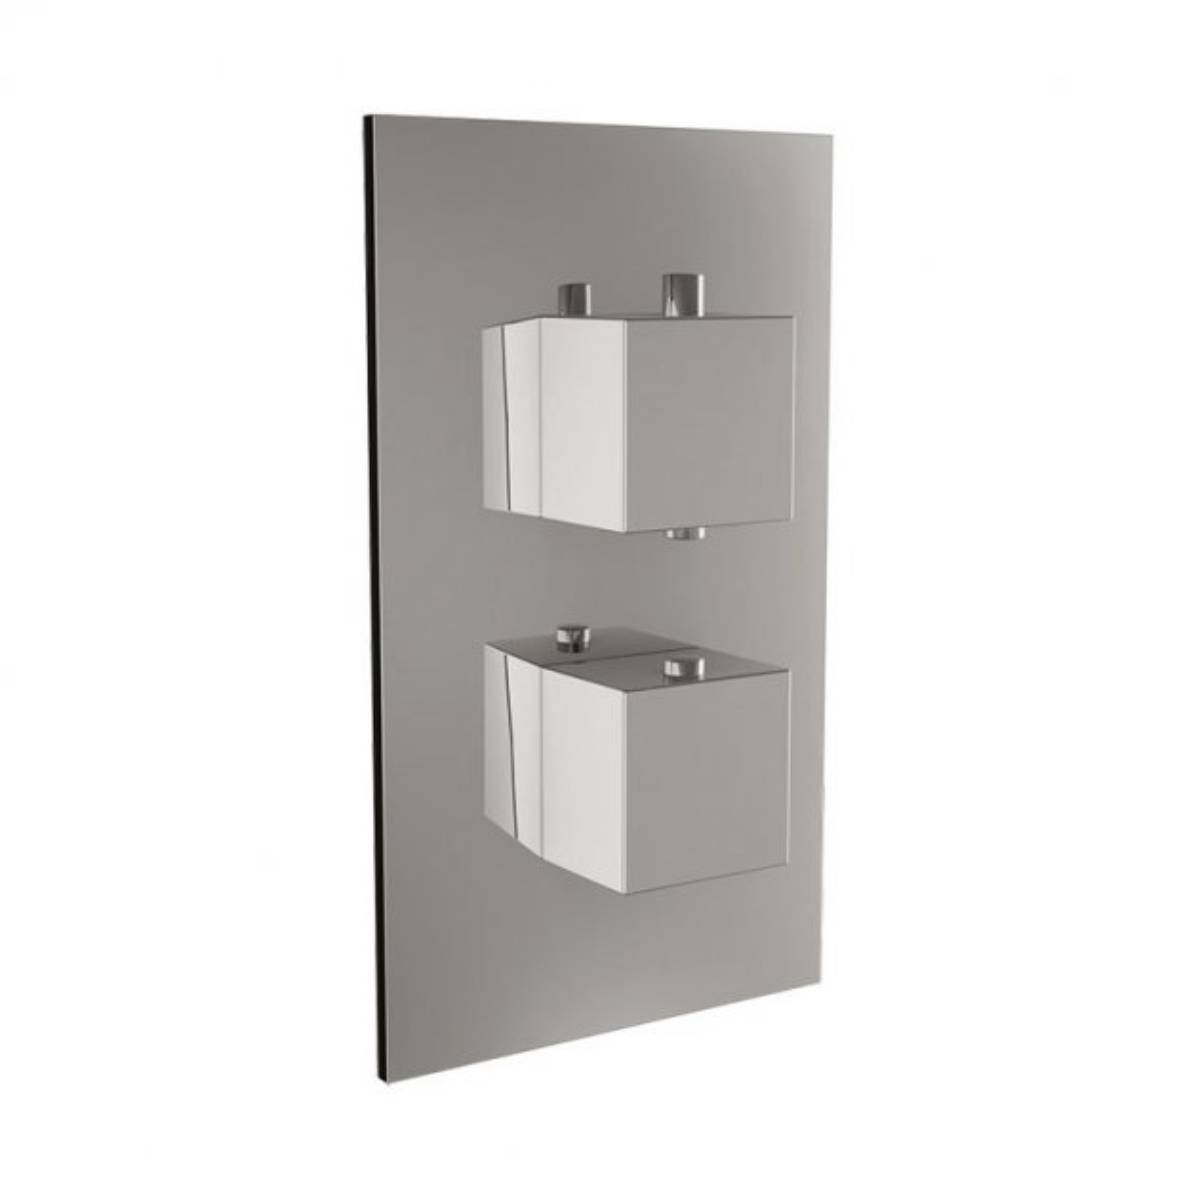 Twin Thermostatic Square Handle Concealed Valve (4169)